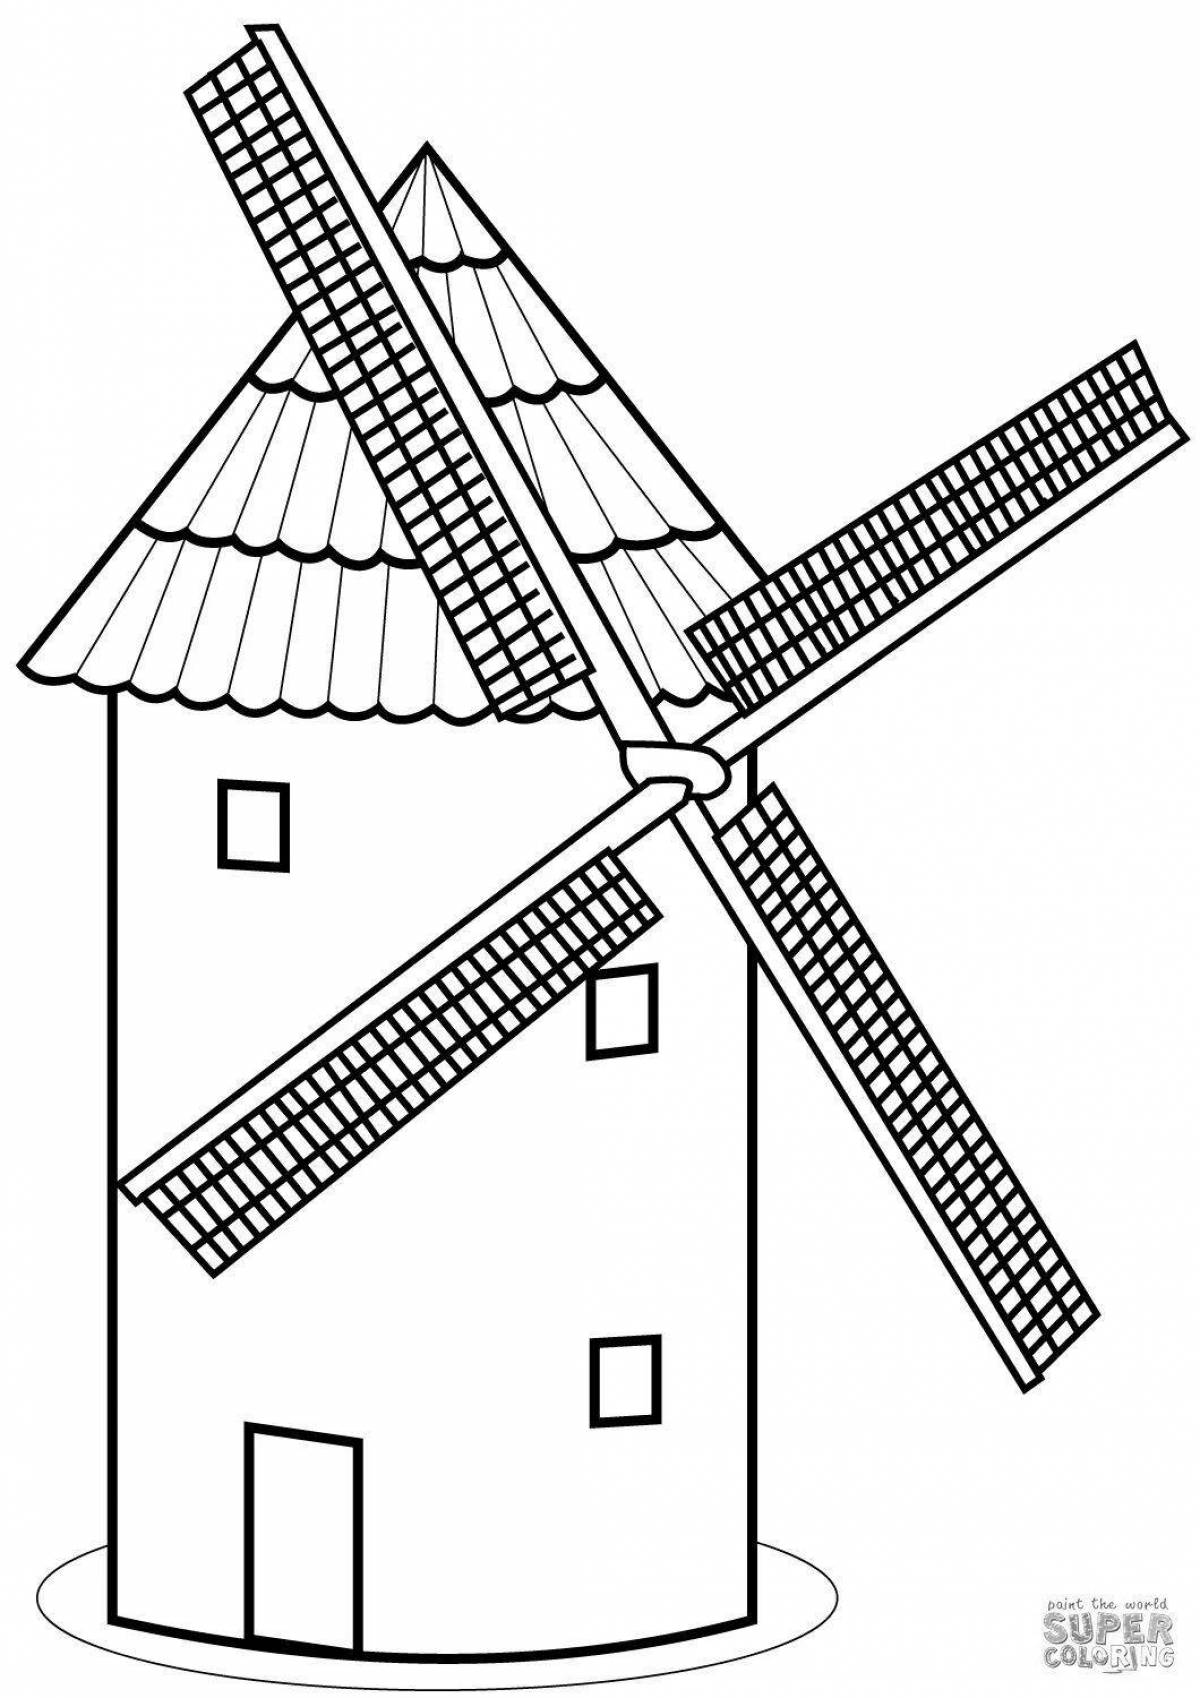 Coloured windmill coloring pages for children